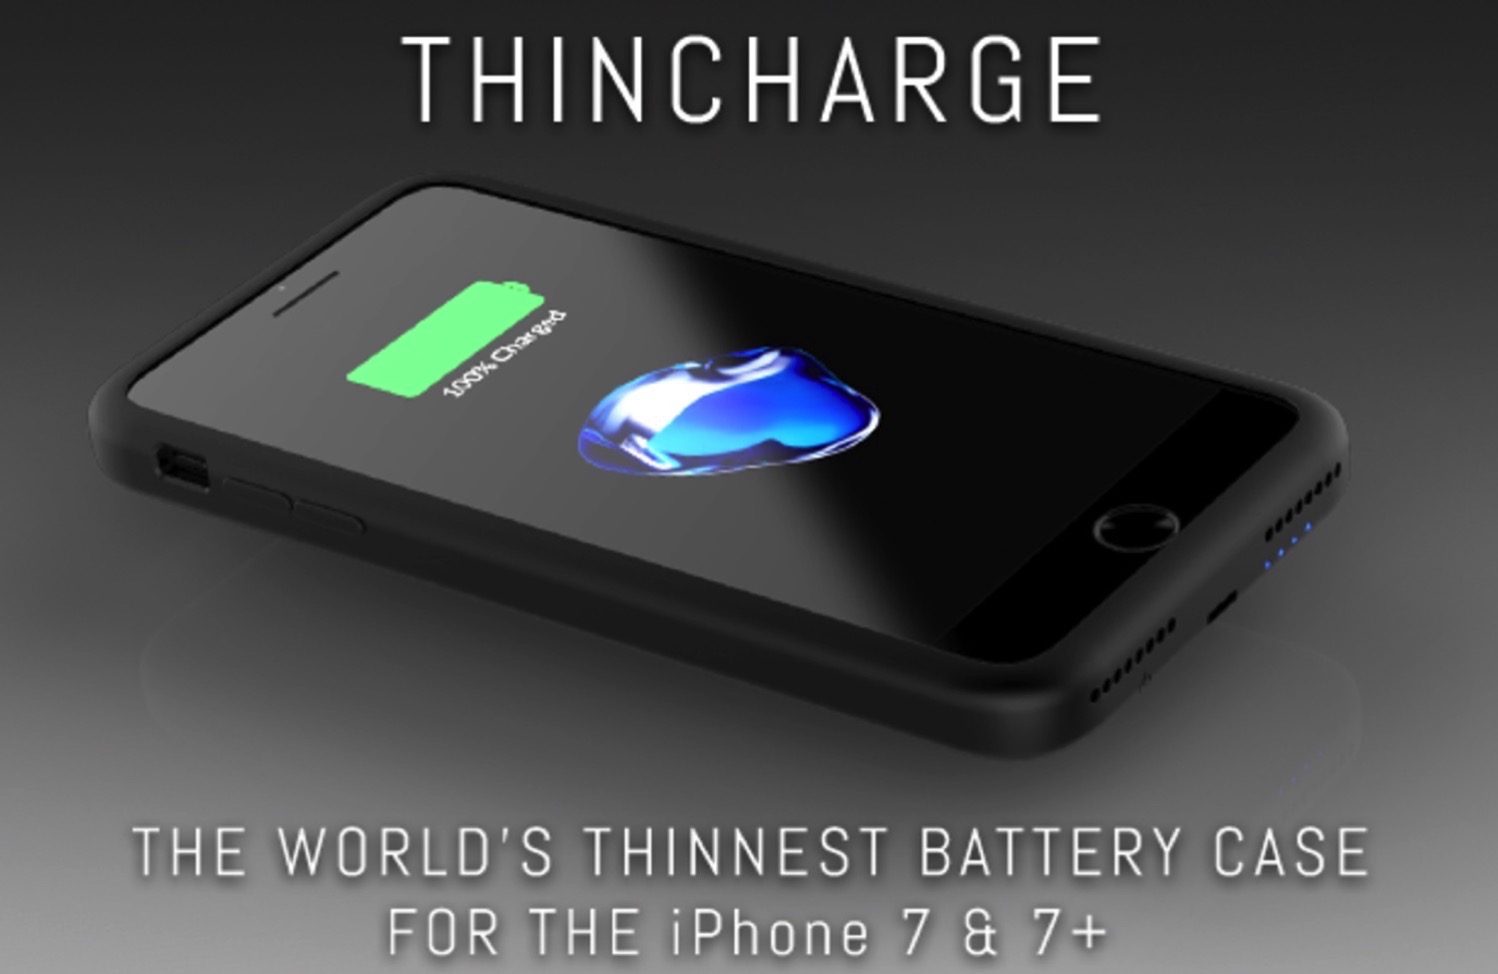 Thin charge 1